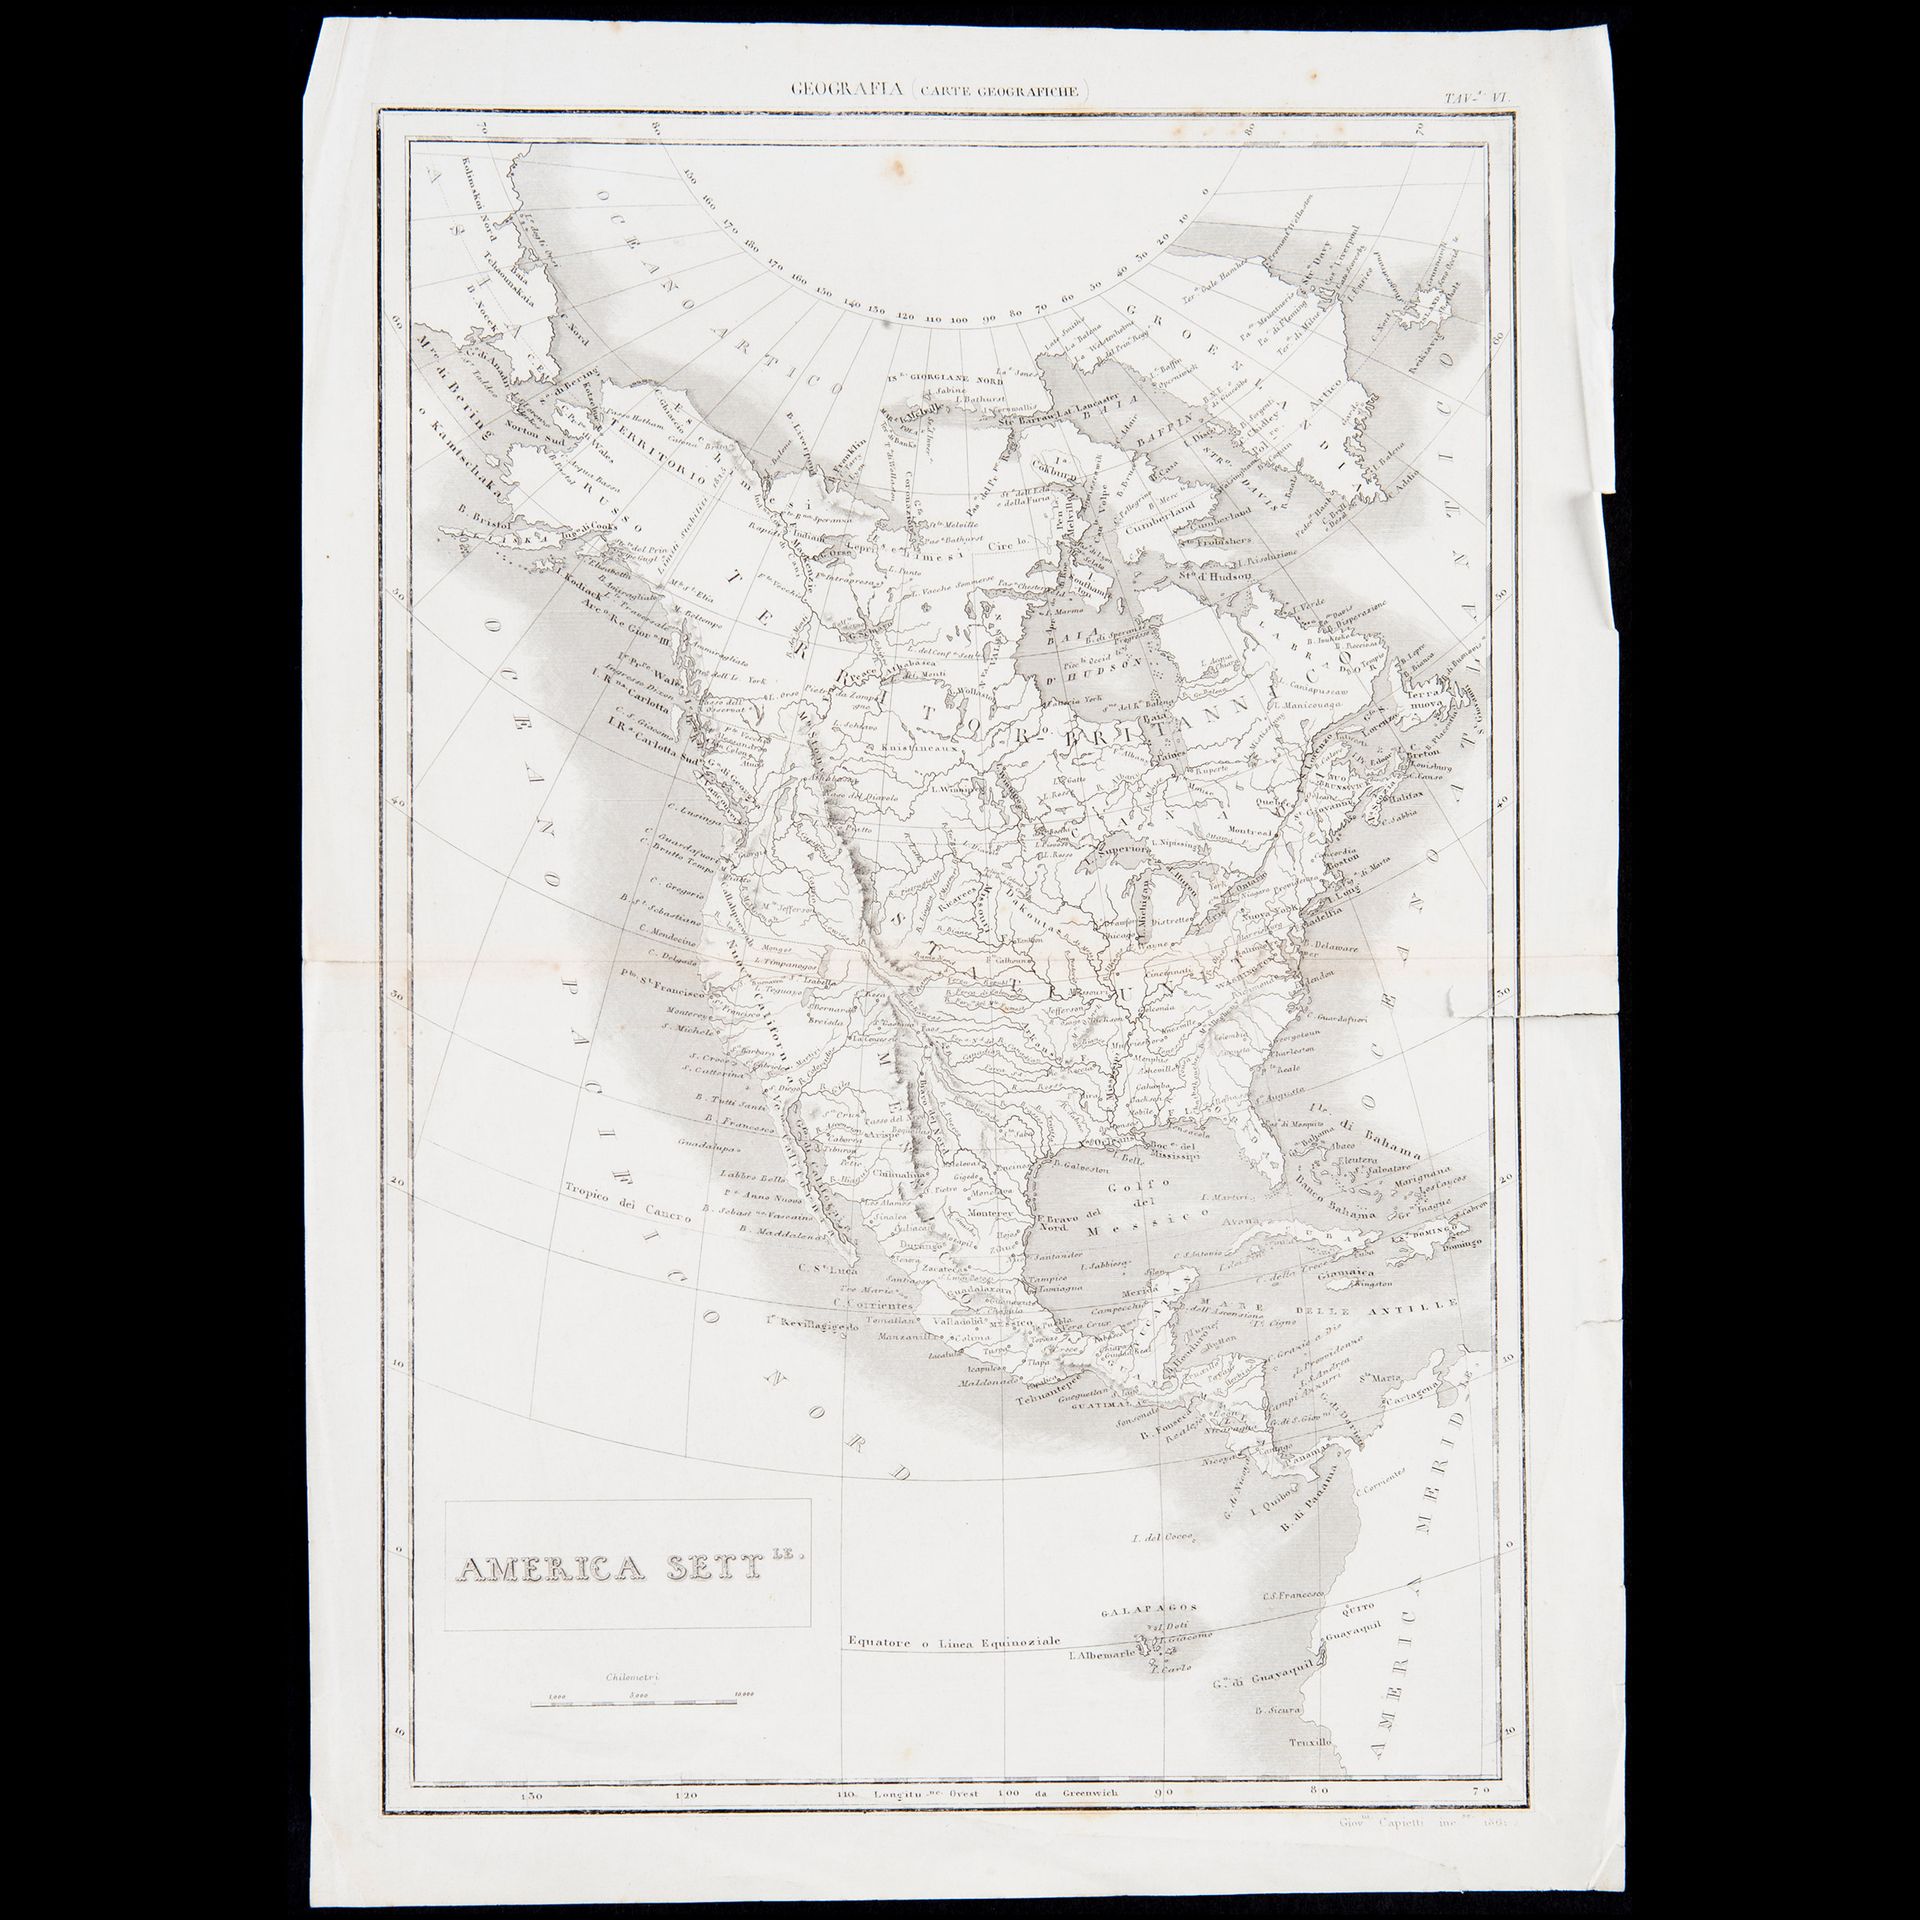 Giovanni Capietti, Map of North America, Italy 1861 Engraving taken from the sec&hellip;